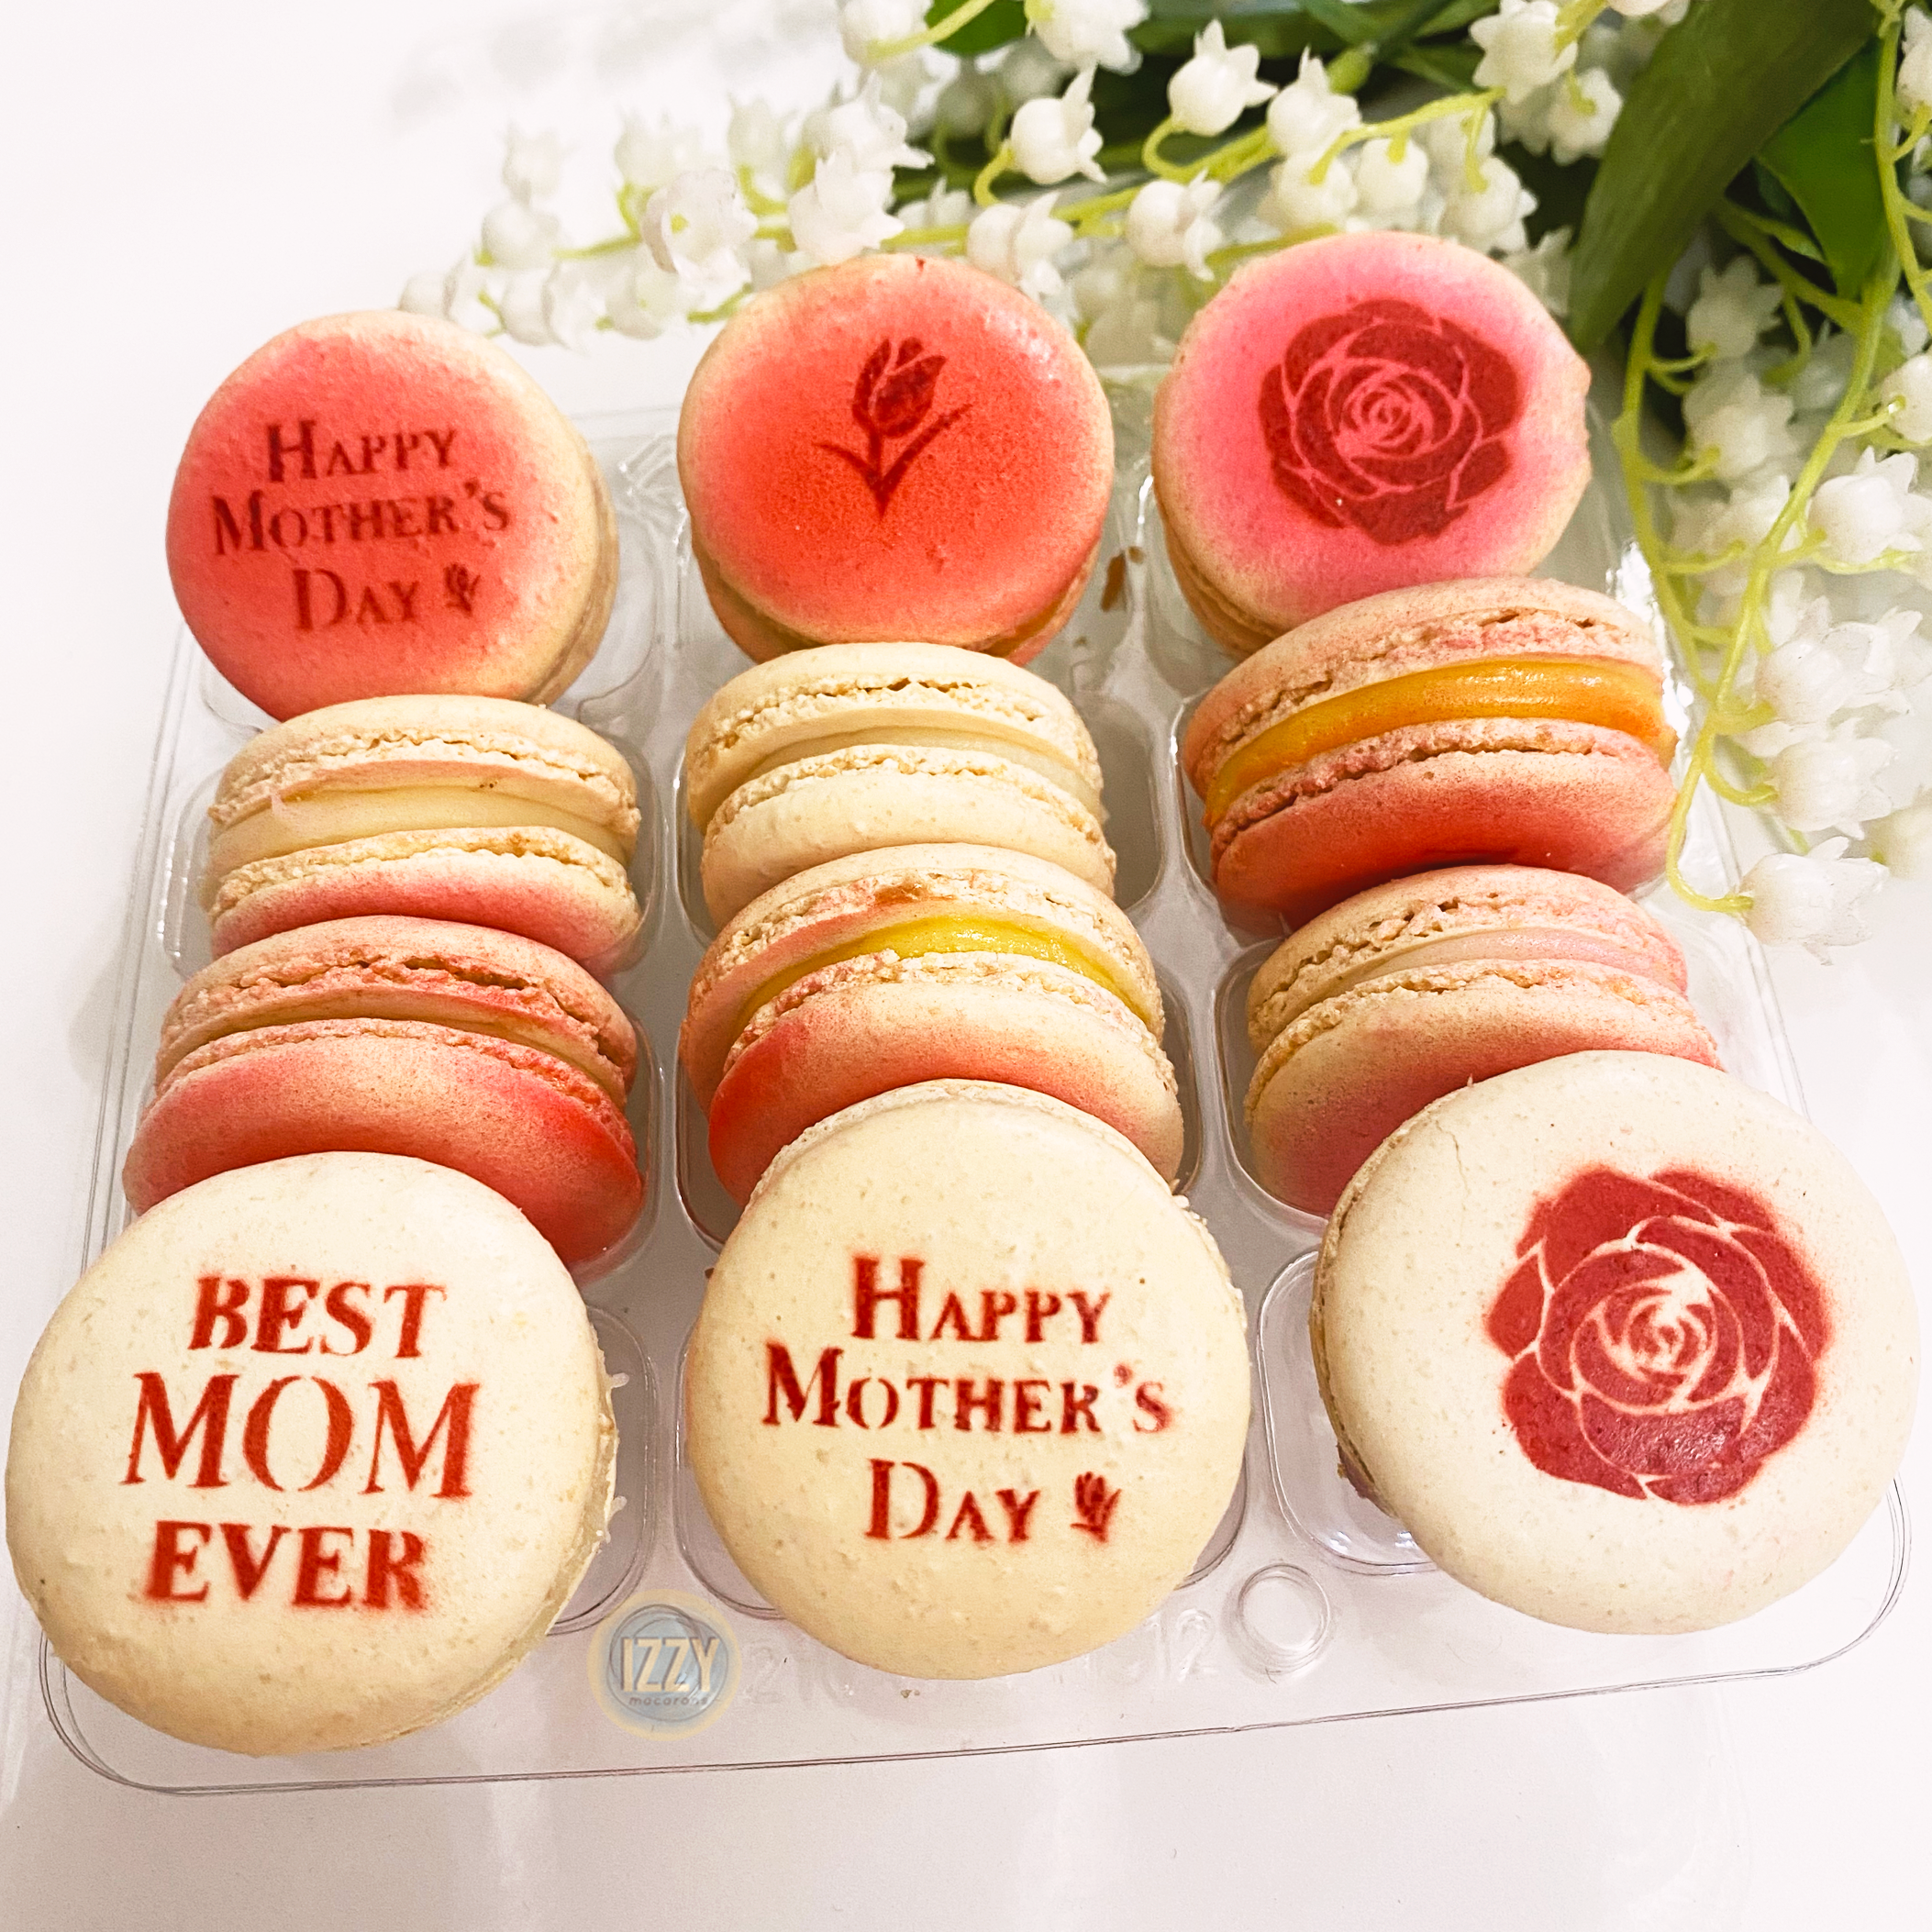 Mother's Day Box - Izzy Macarons